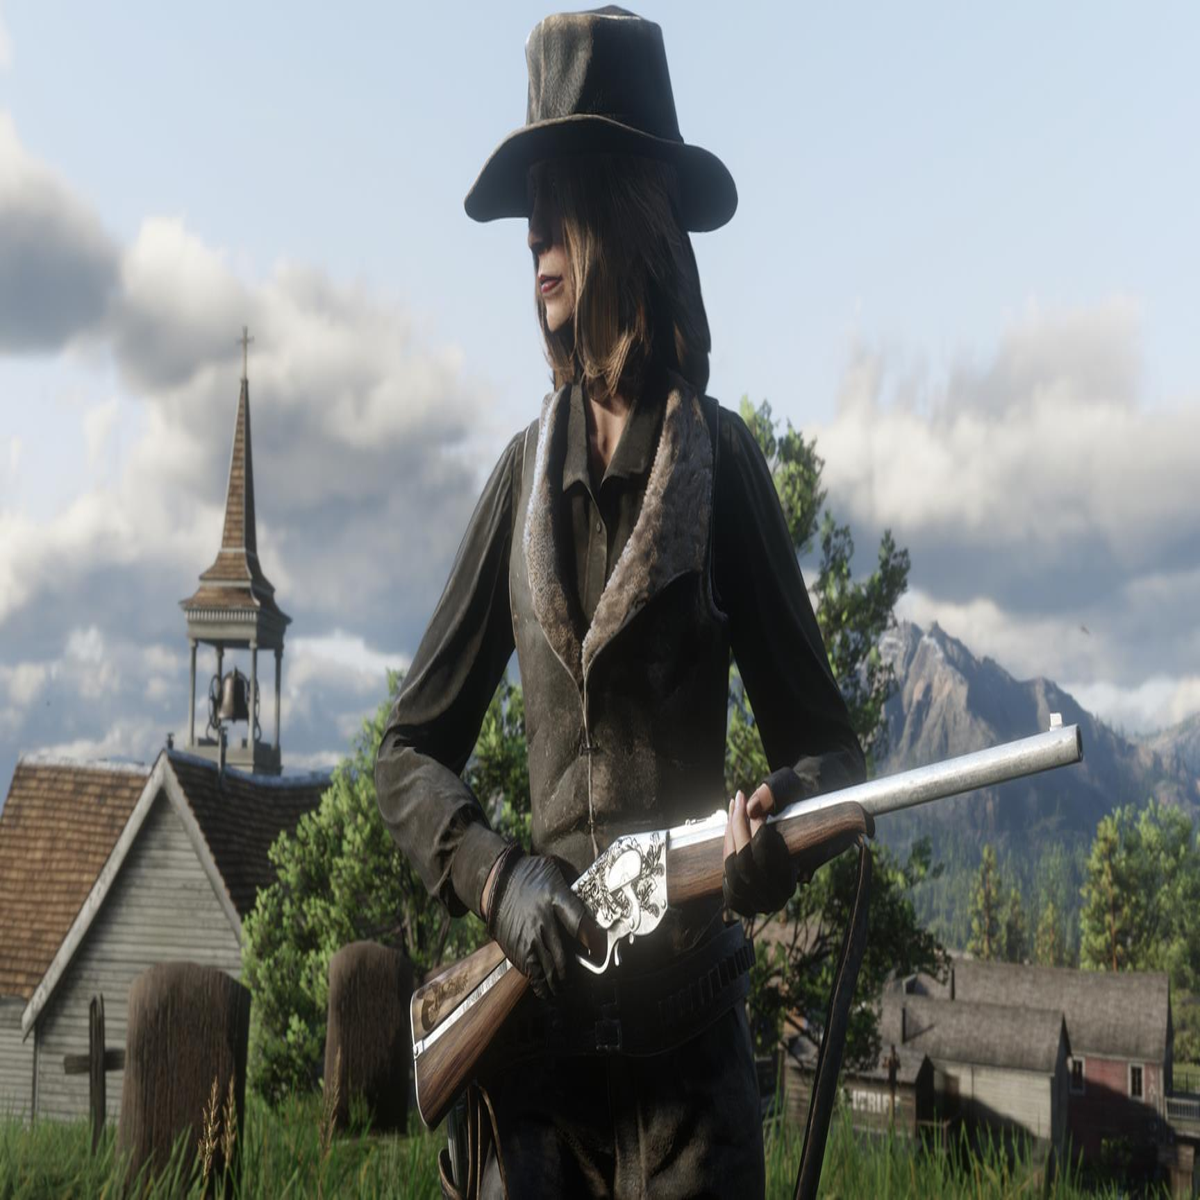 Red Dead Online Goes Out of Beta as New Massive Update Introduces